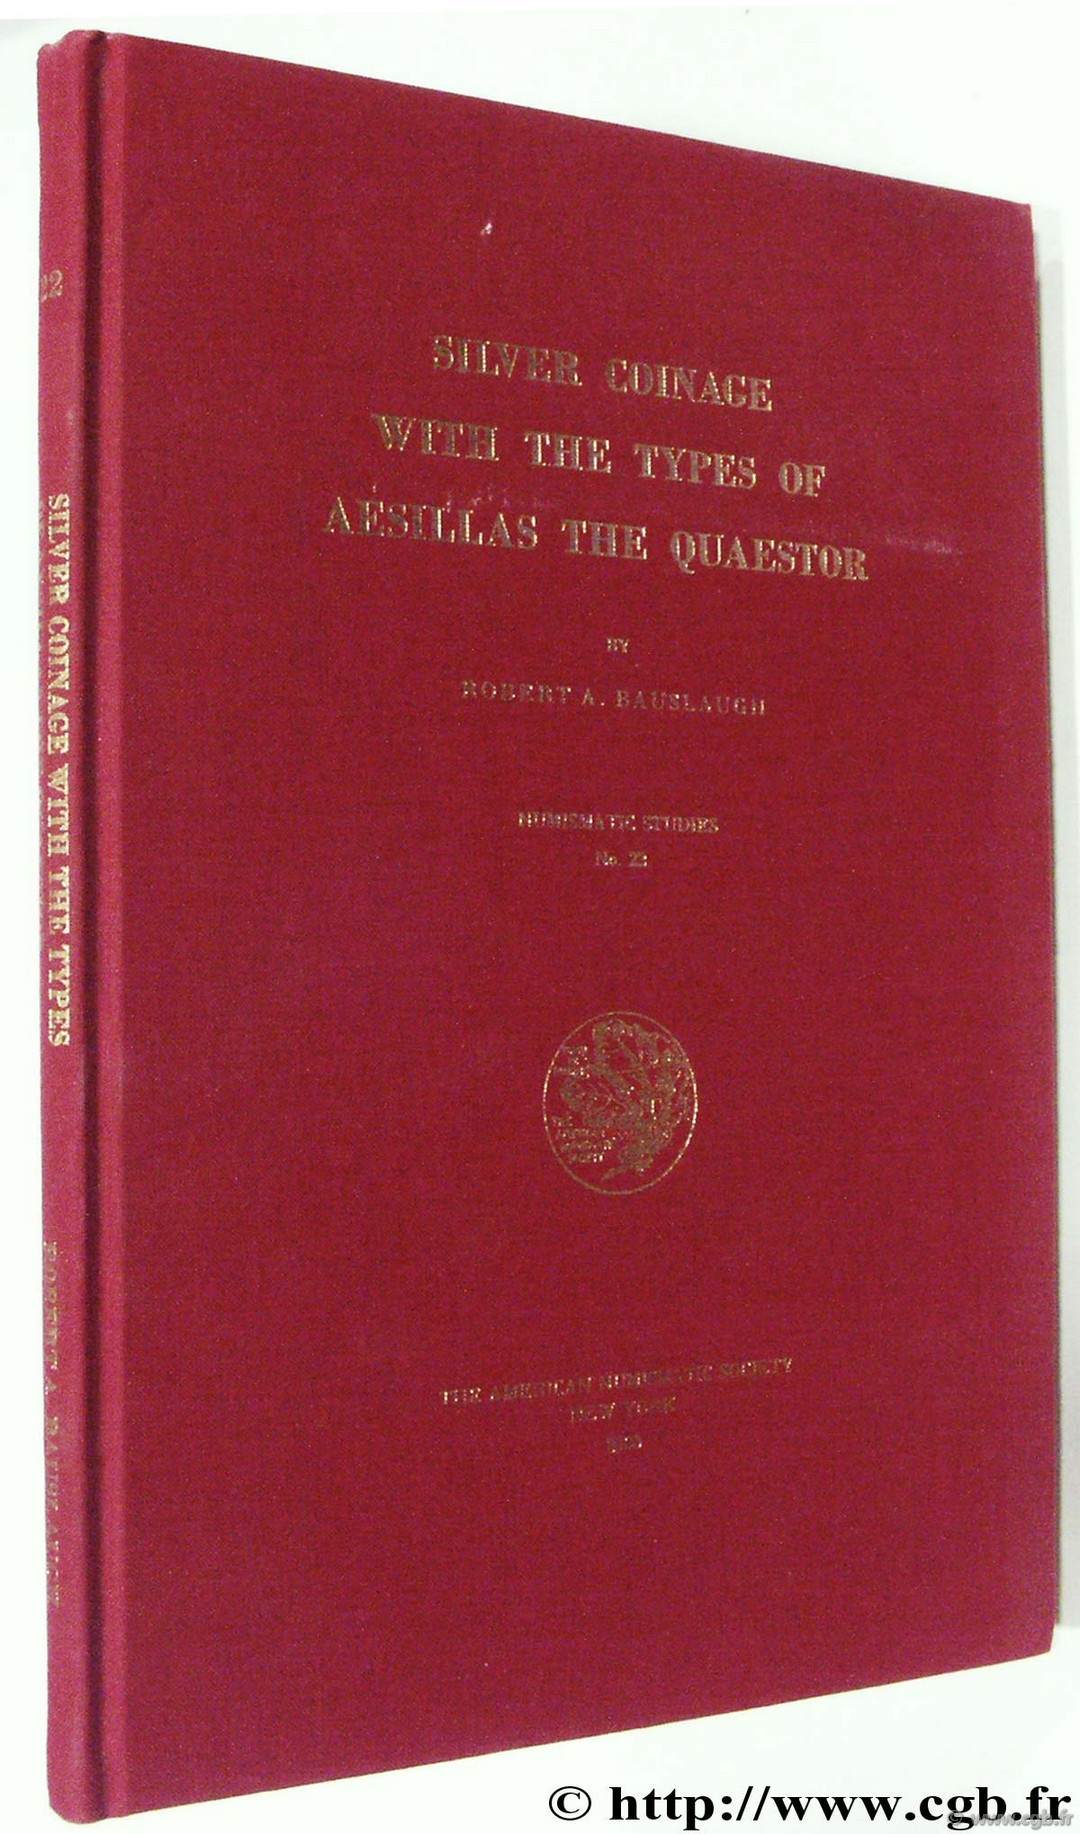 Silver Coinage with the Types of Aesillas the Quaestor, Numismatic Studies 22, The American Numismatic Society BAUSLAUGH R.-A.